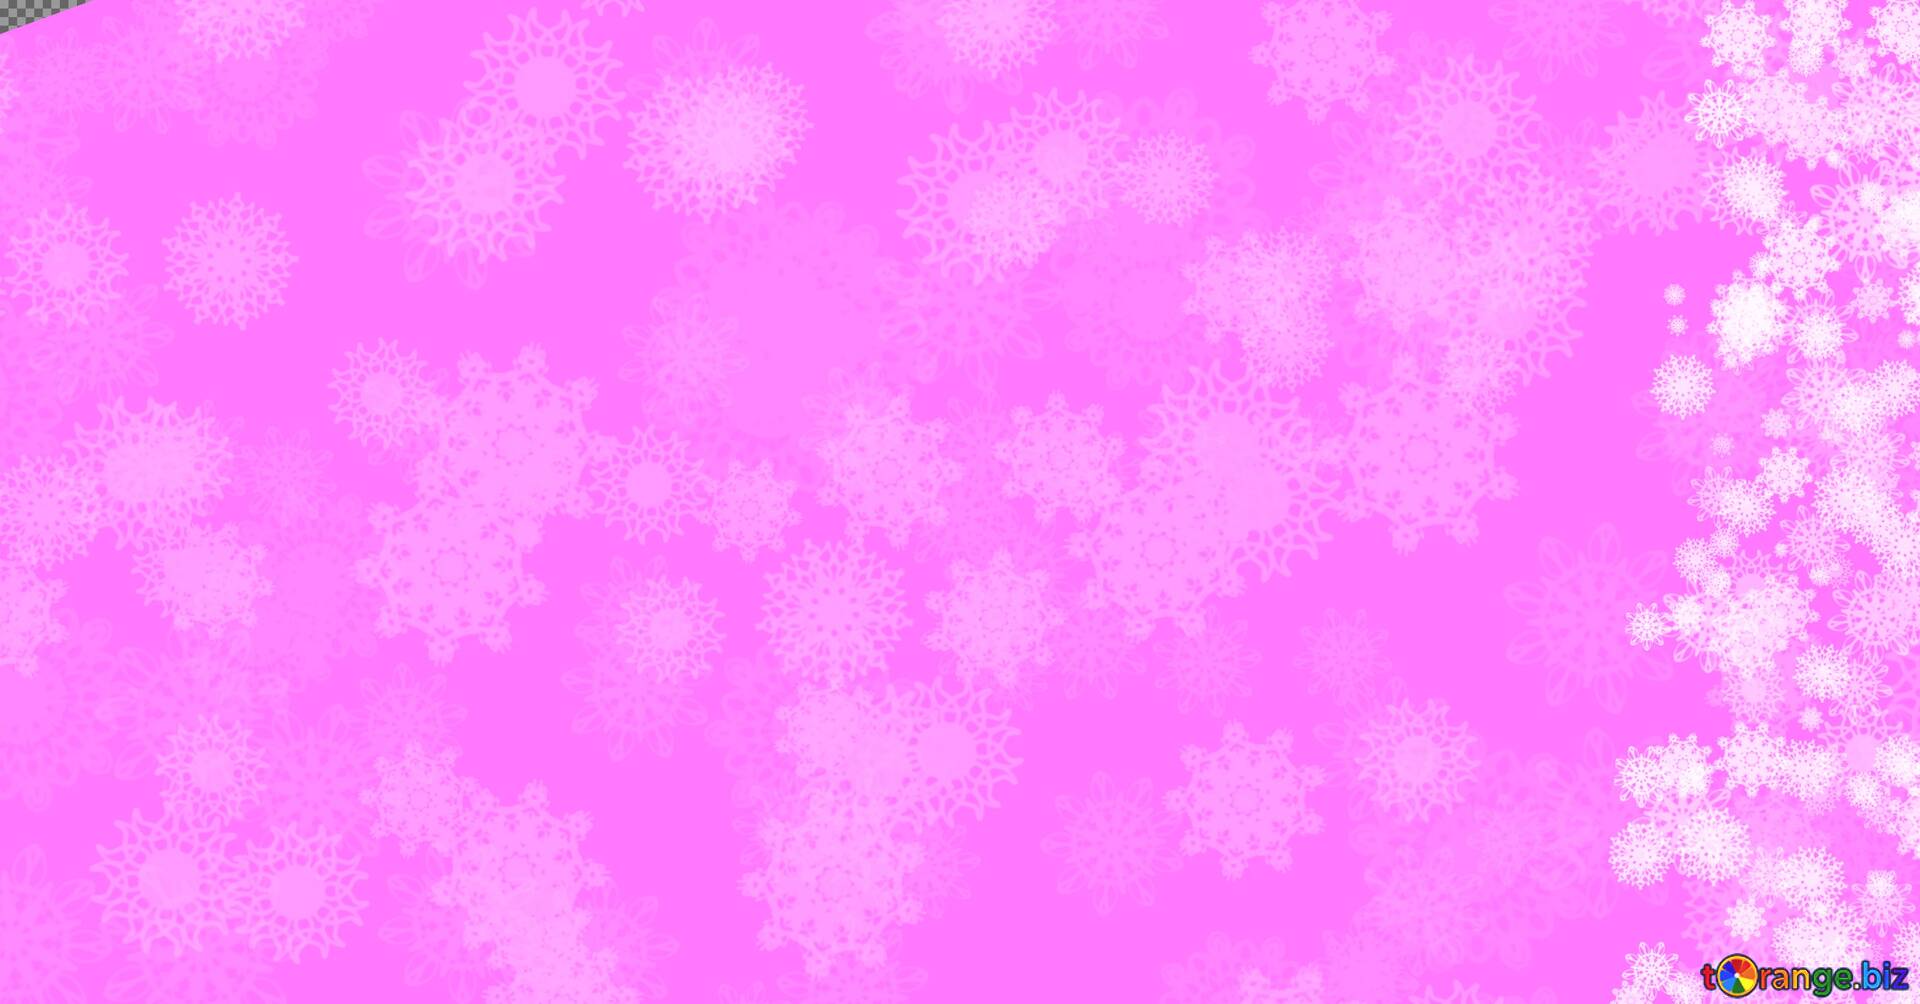 Download Free Picture Snowflakes And Christmas Tree Clipart Pink Background On CC BY License Free Image Stock TOrange.biz Fx №68826